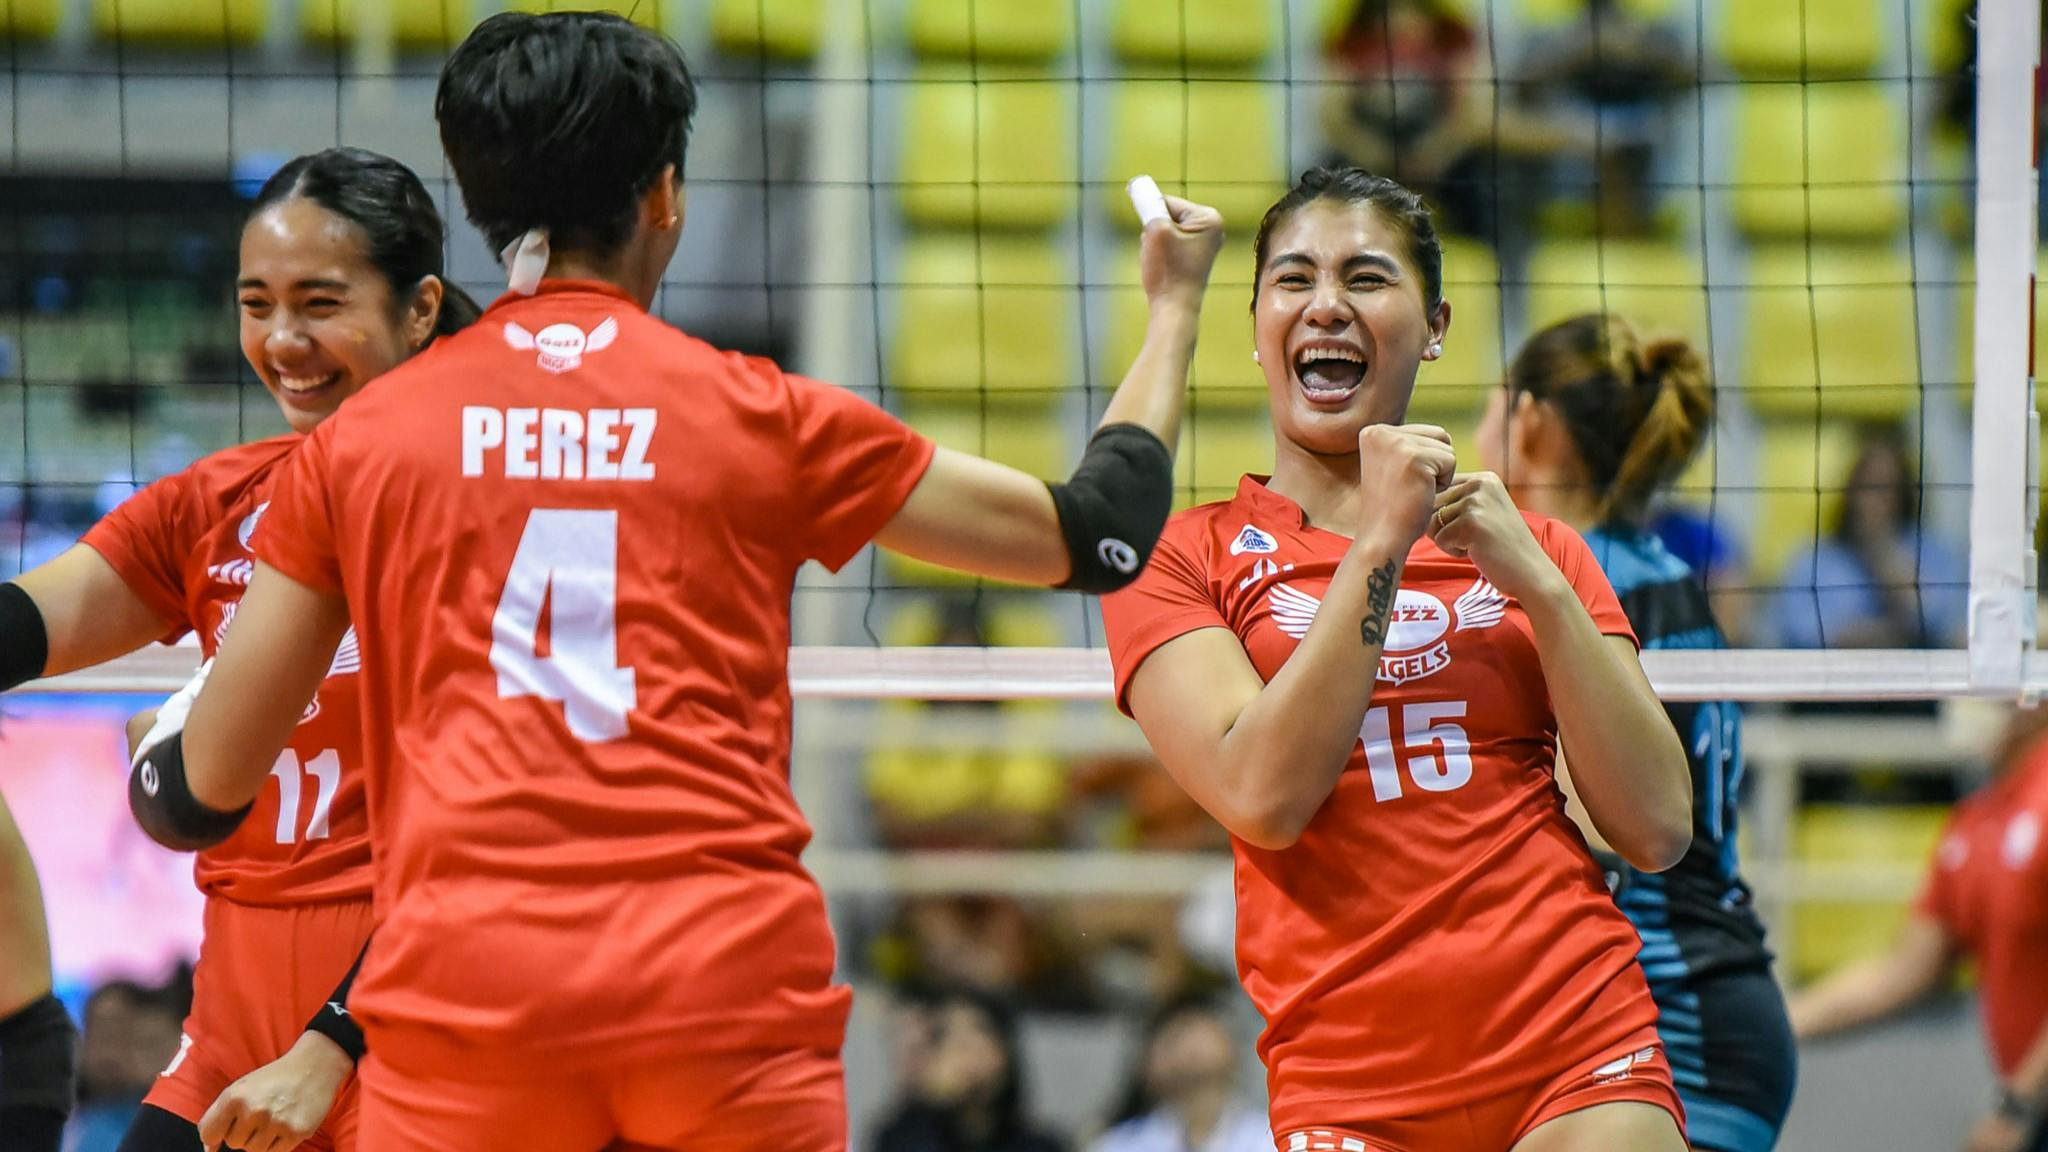 PVL: Myla Pablo embracing new role as opposite hitter for Petro Gazz